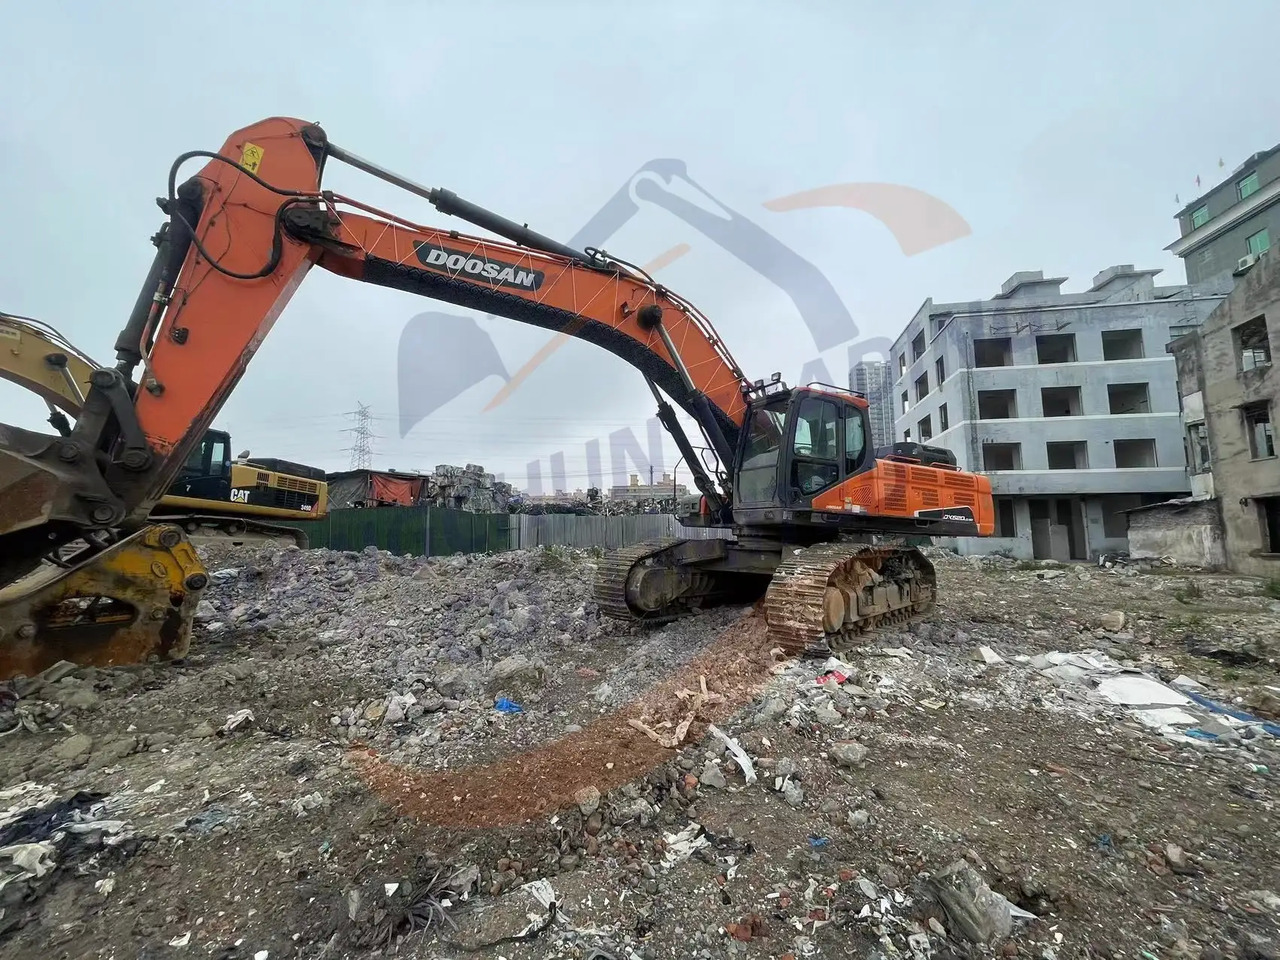 Pelle sur chenille new arrival Used Doosan excavator DX520LC-9C in good condition for sale in good condition: photos 4